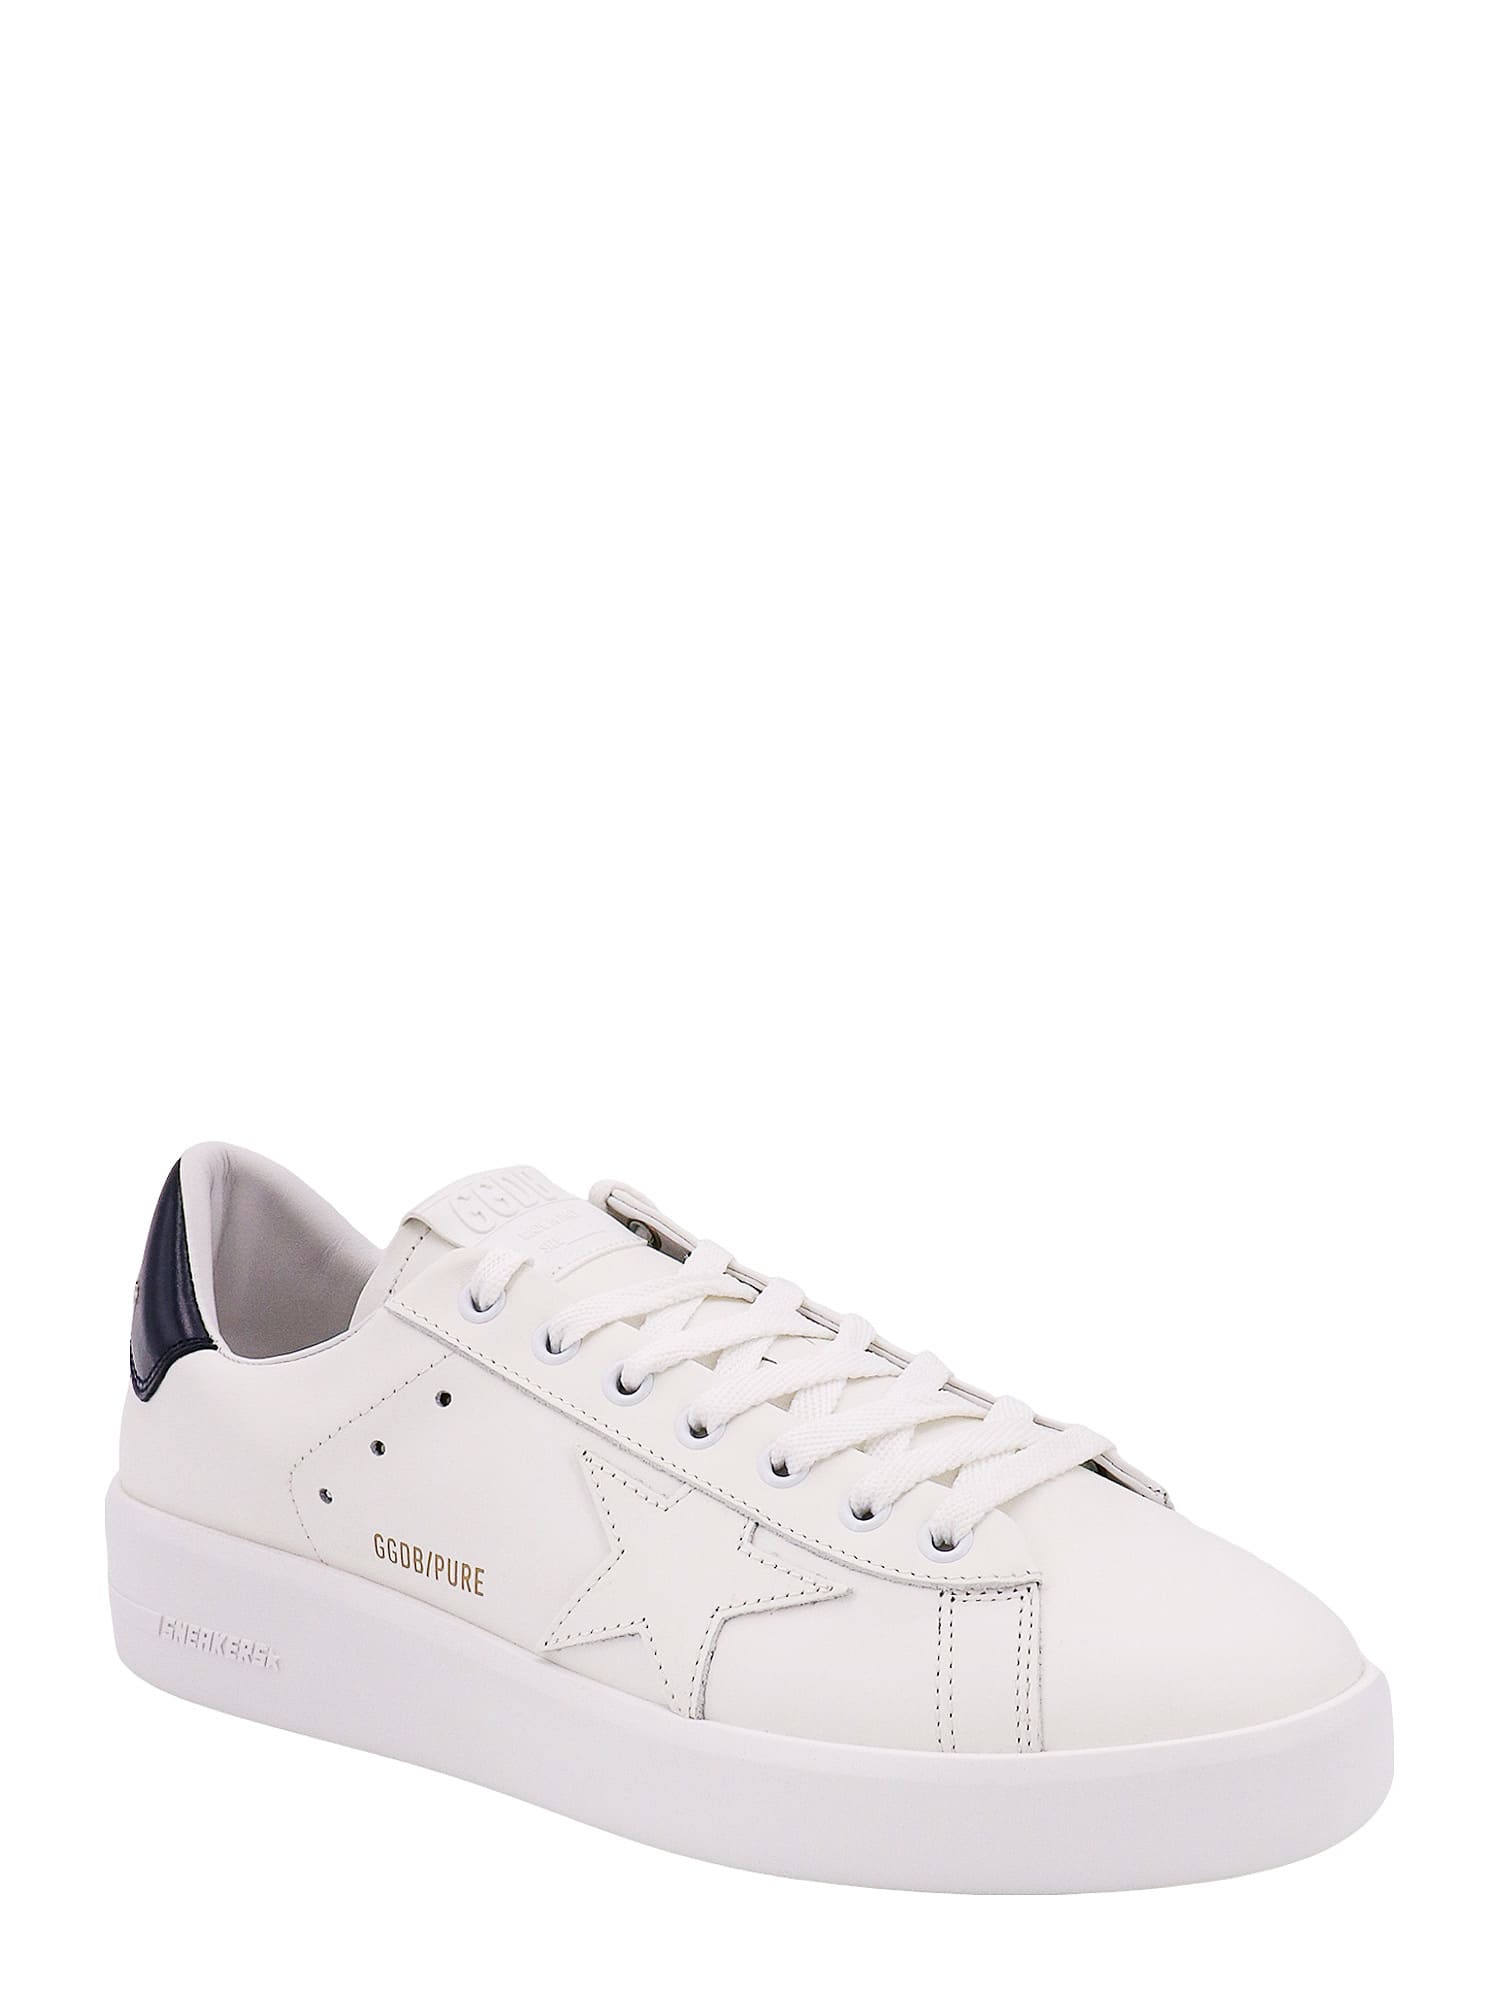 Shop Golden Goose Pure New Sneakers In White/blue